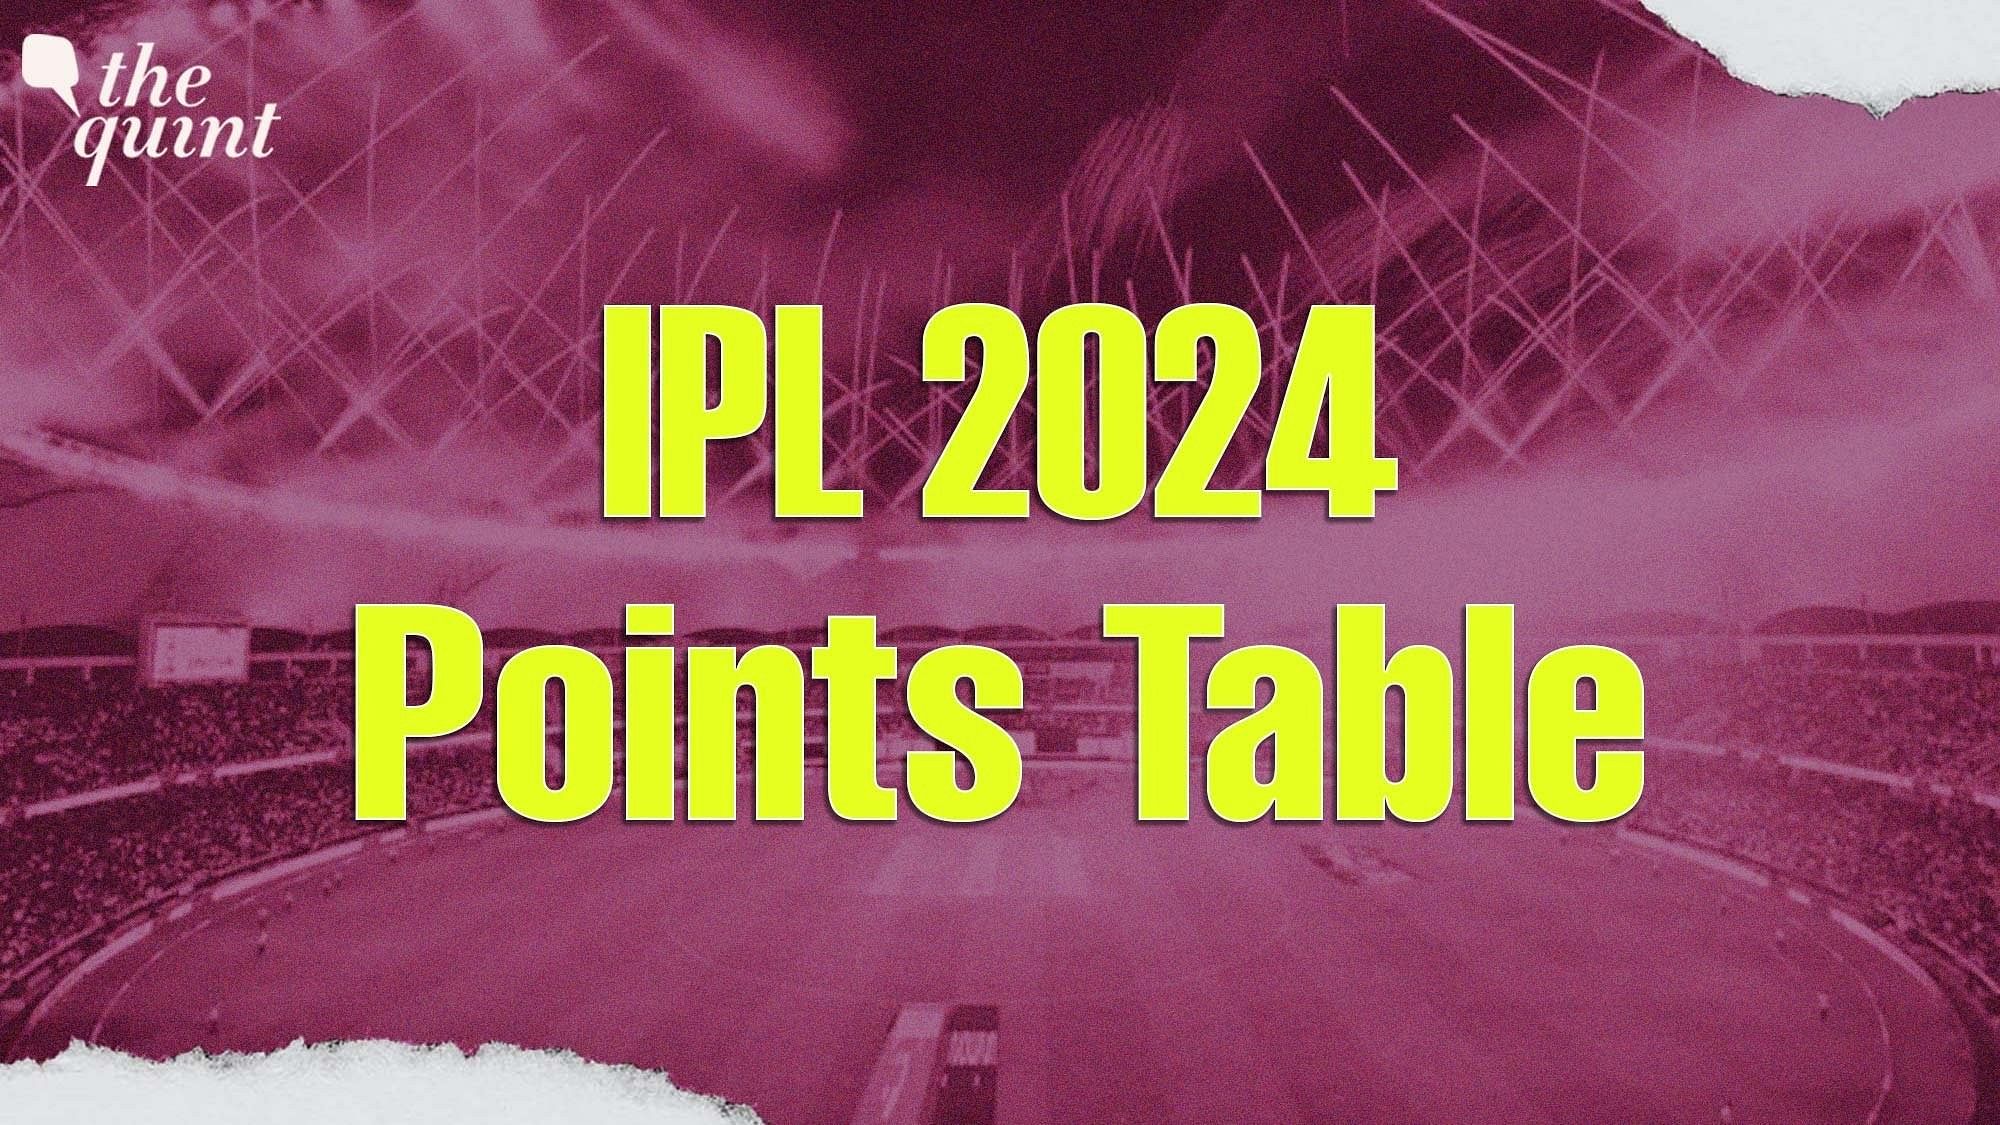 <div class="paragraphs"><p>IPL 2024 Points Table is updated here after the KKR vs SRH match on Saturday, 23 March.</p></div>